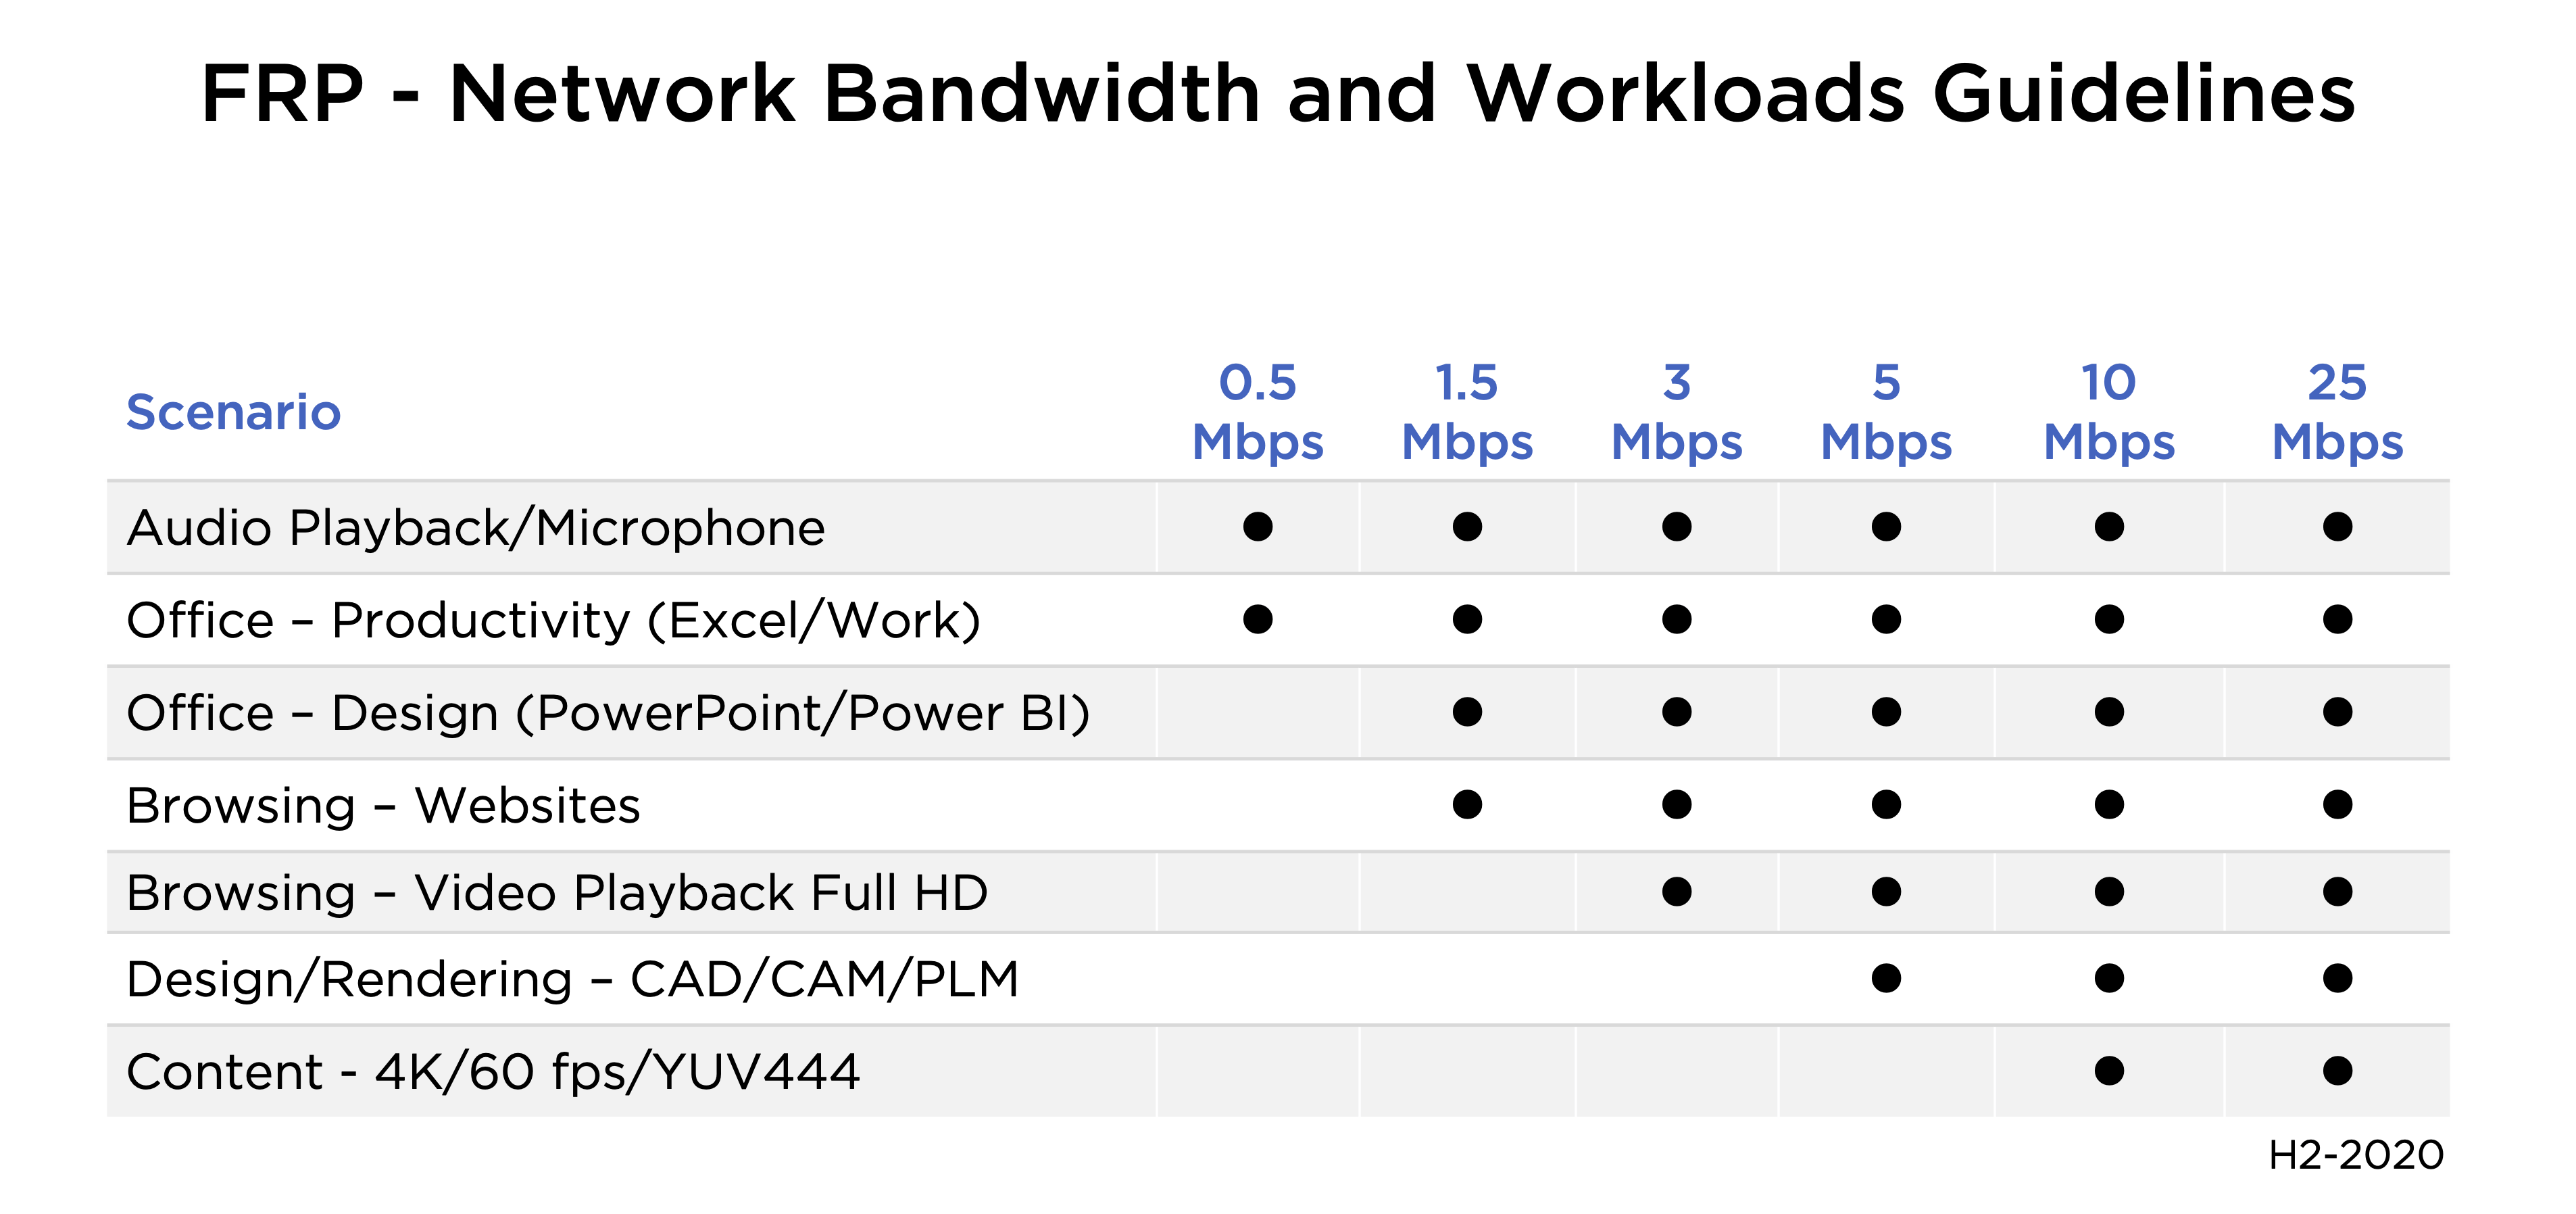 Figure 2. Network peak bandwidth and workload guidelines for FRP